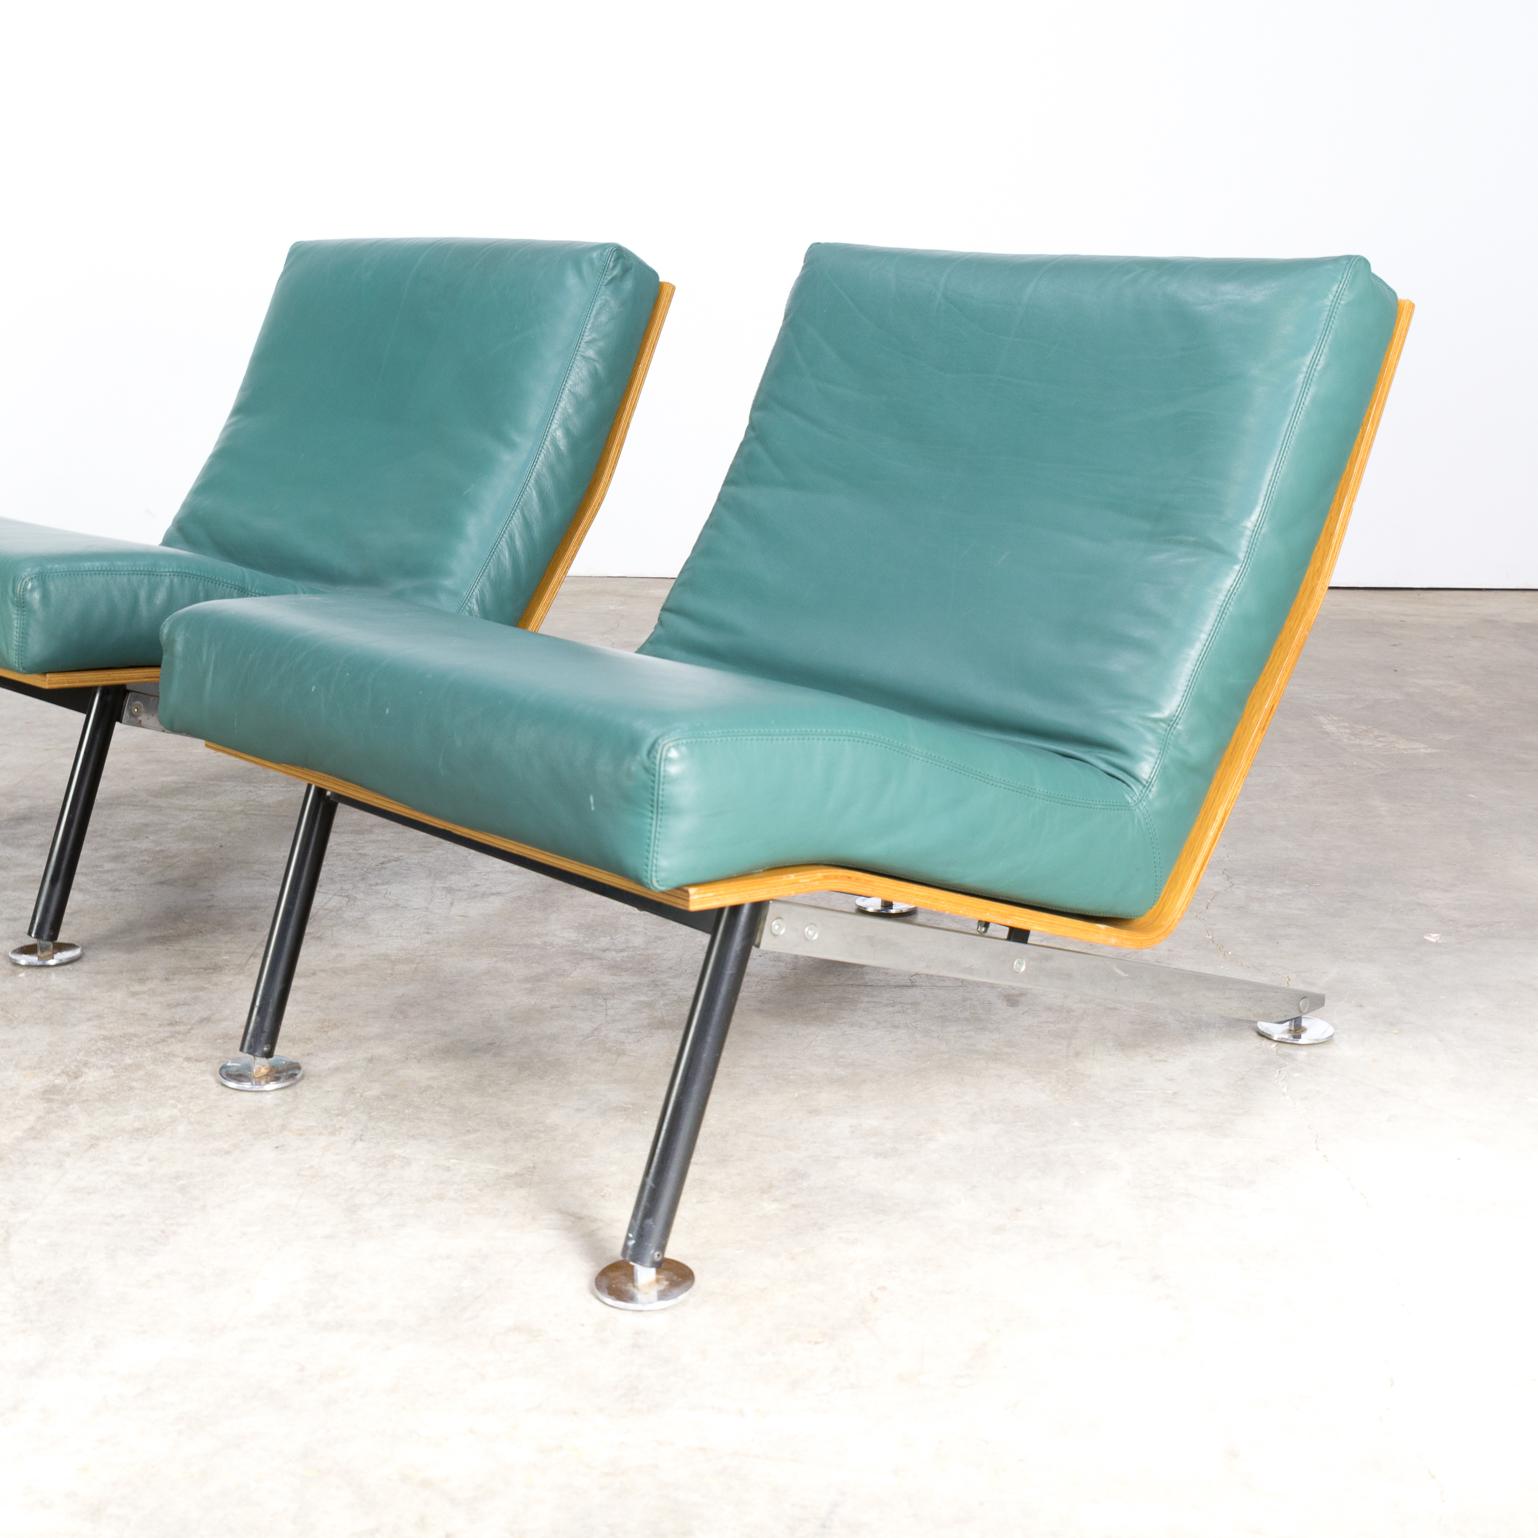 1960s Low Lounge Chair by Felice Rossi Set of 2 For Sale 4